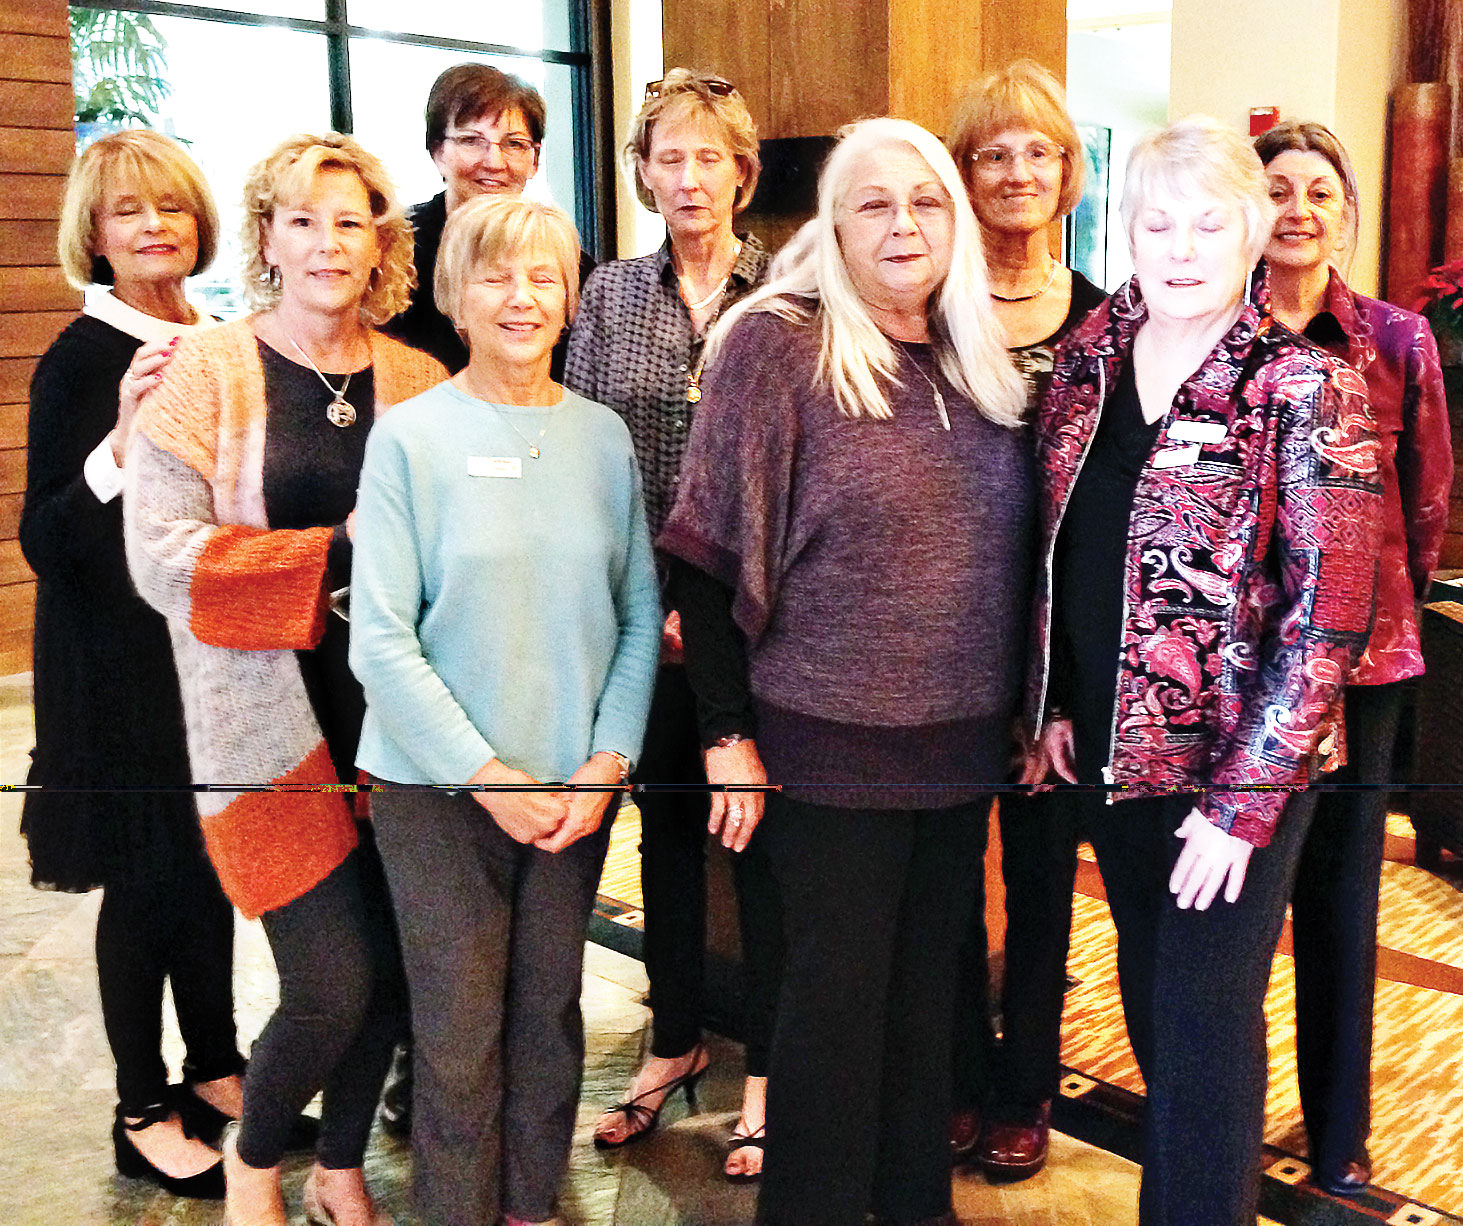 New SBR Women’s Club members, left to right front row: Lisa Brown, Kathy Tossey, Bonnie Goldman, Barb Warnell; back row: Judy Dodson, Sue Cook, Susan Hastings, Barbara Miller, Maria Astaire; photo by Marlene Diskin